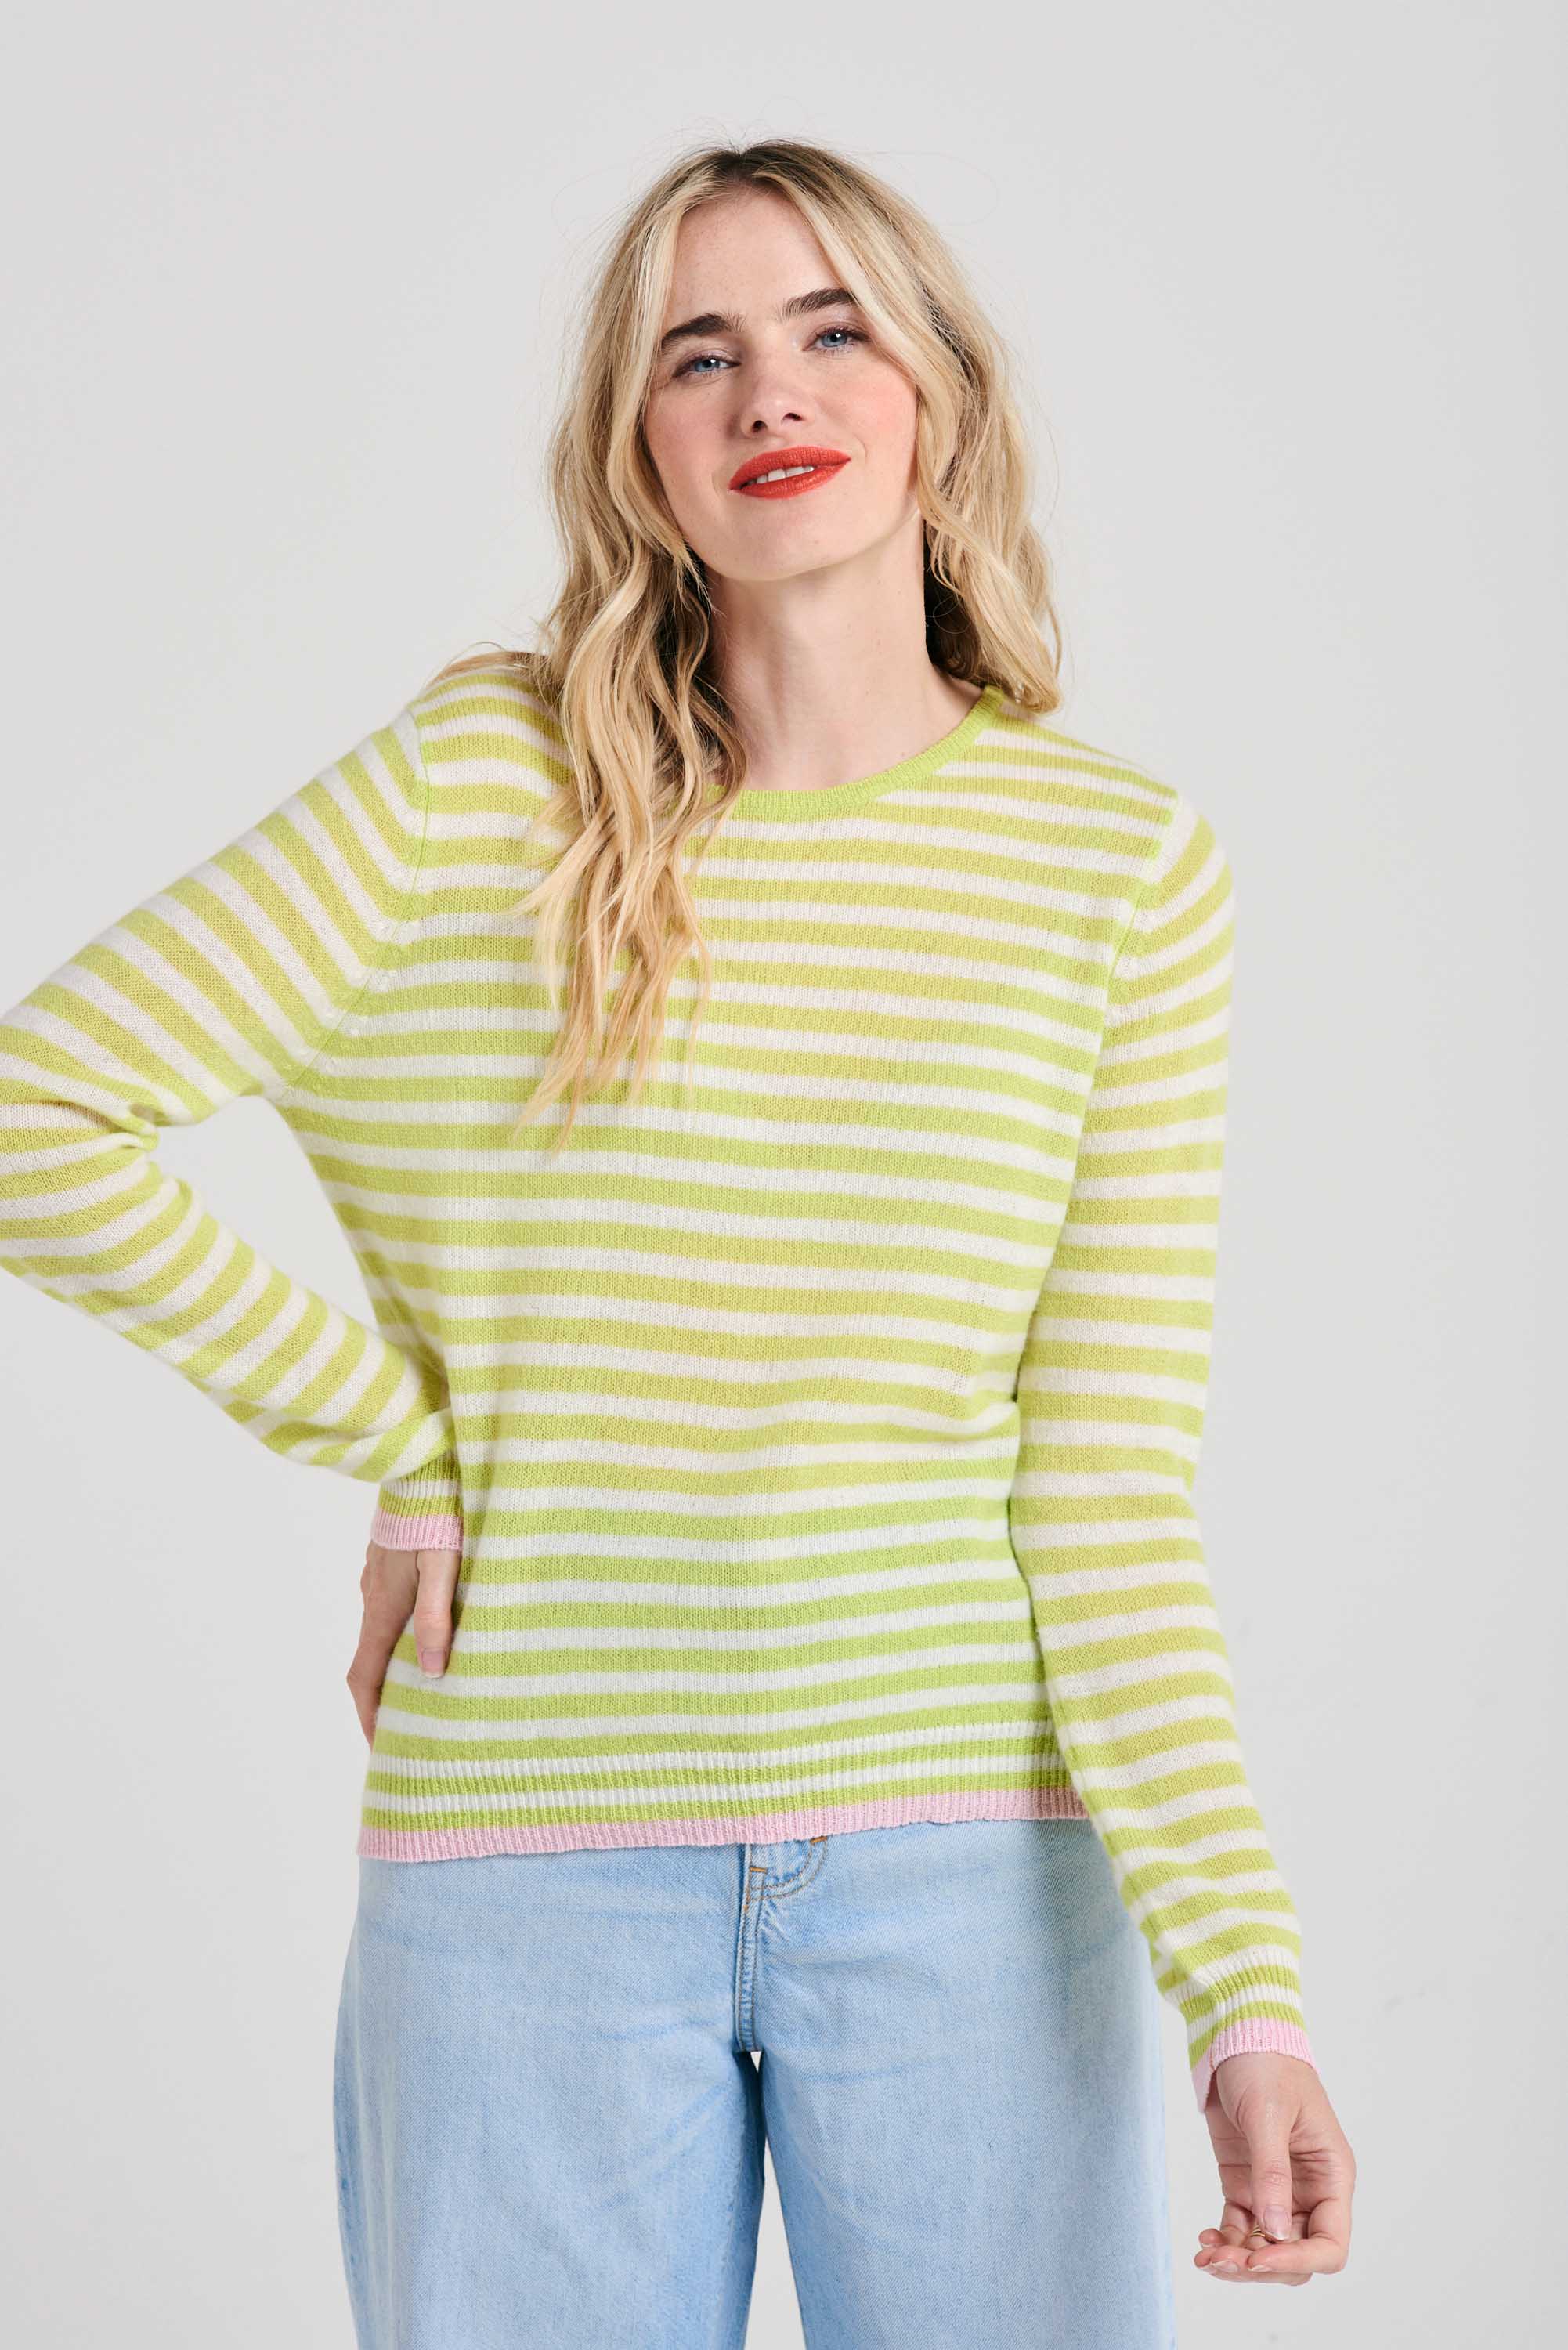 Blonde female model wearing Jumper1234 Little stripe cashmere crew neck jumper in acid green and cream, with pale pink tipped ribs